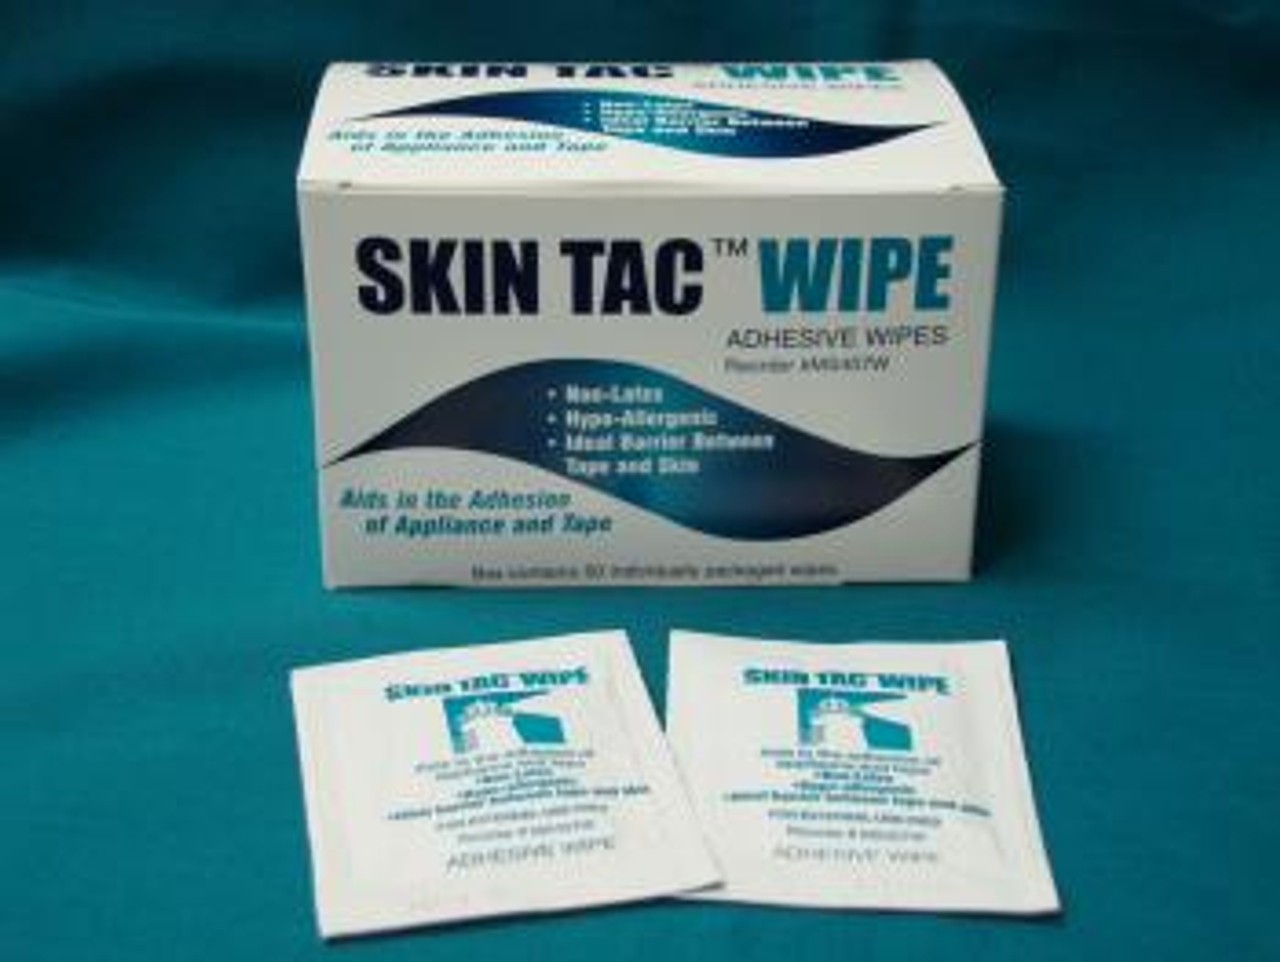 Skin Protective Wipes  Skin Tac Liquid Adhesive Barrier on Sale at  Parthenon Now!